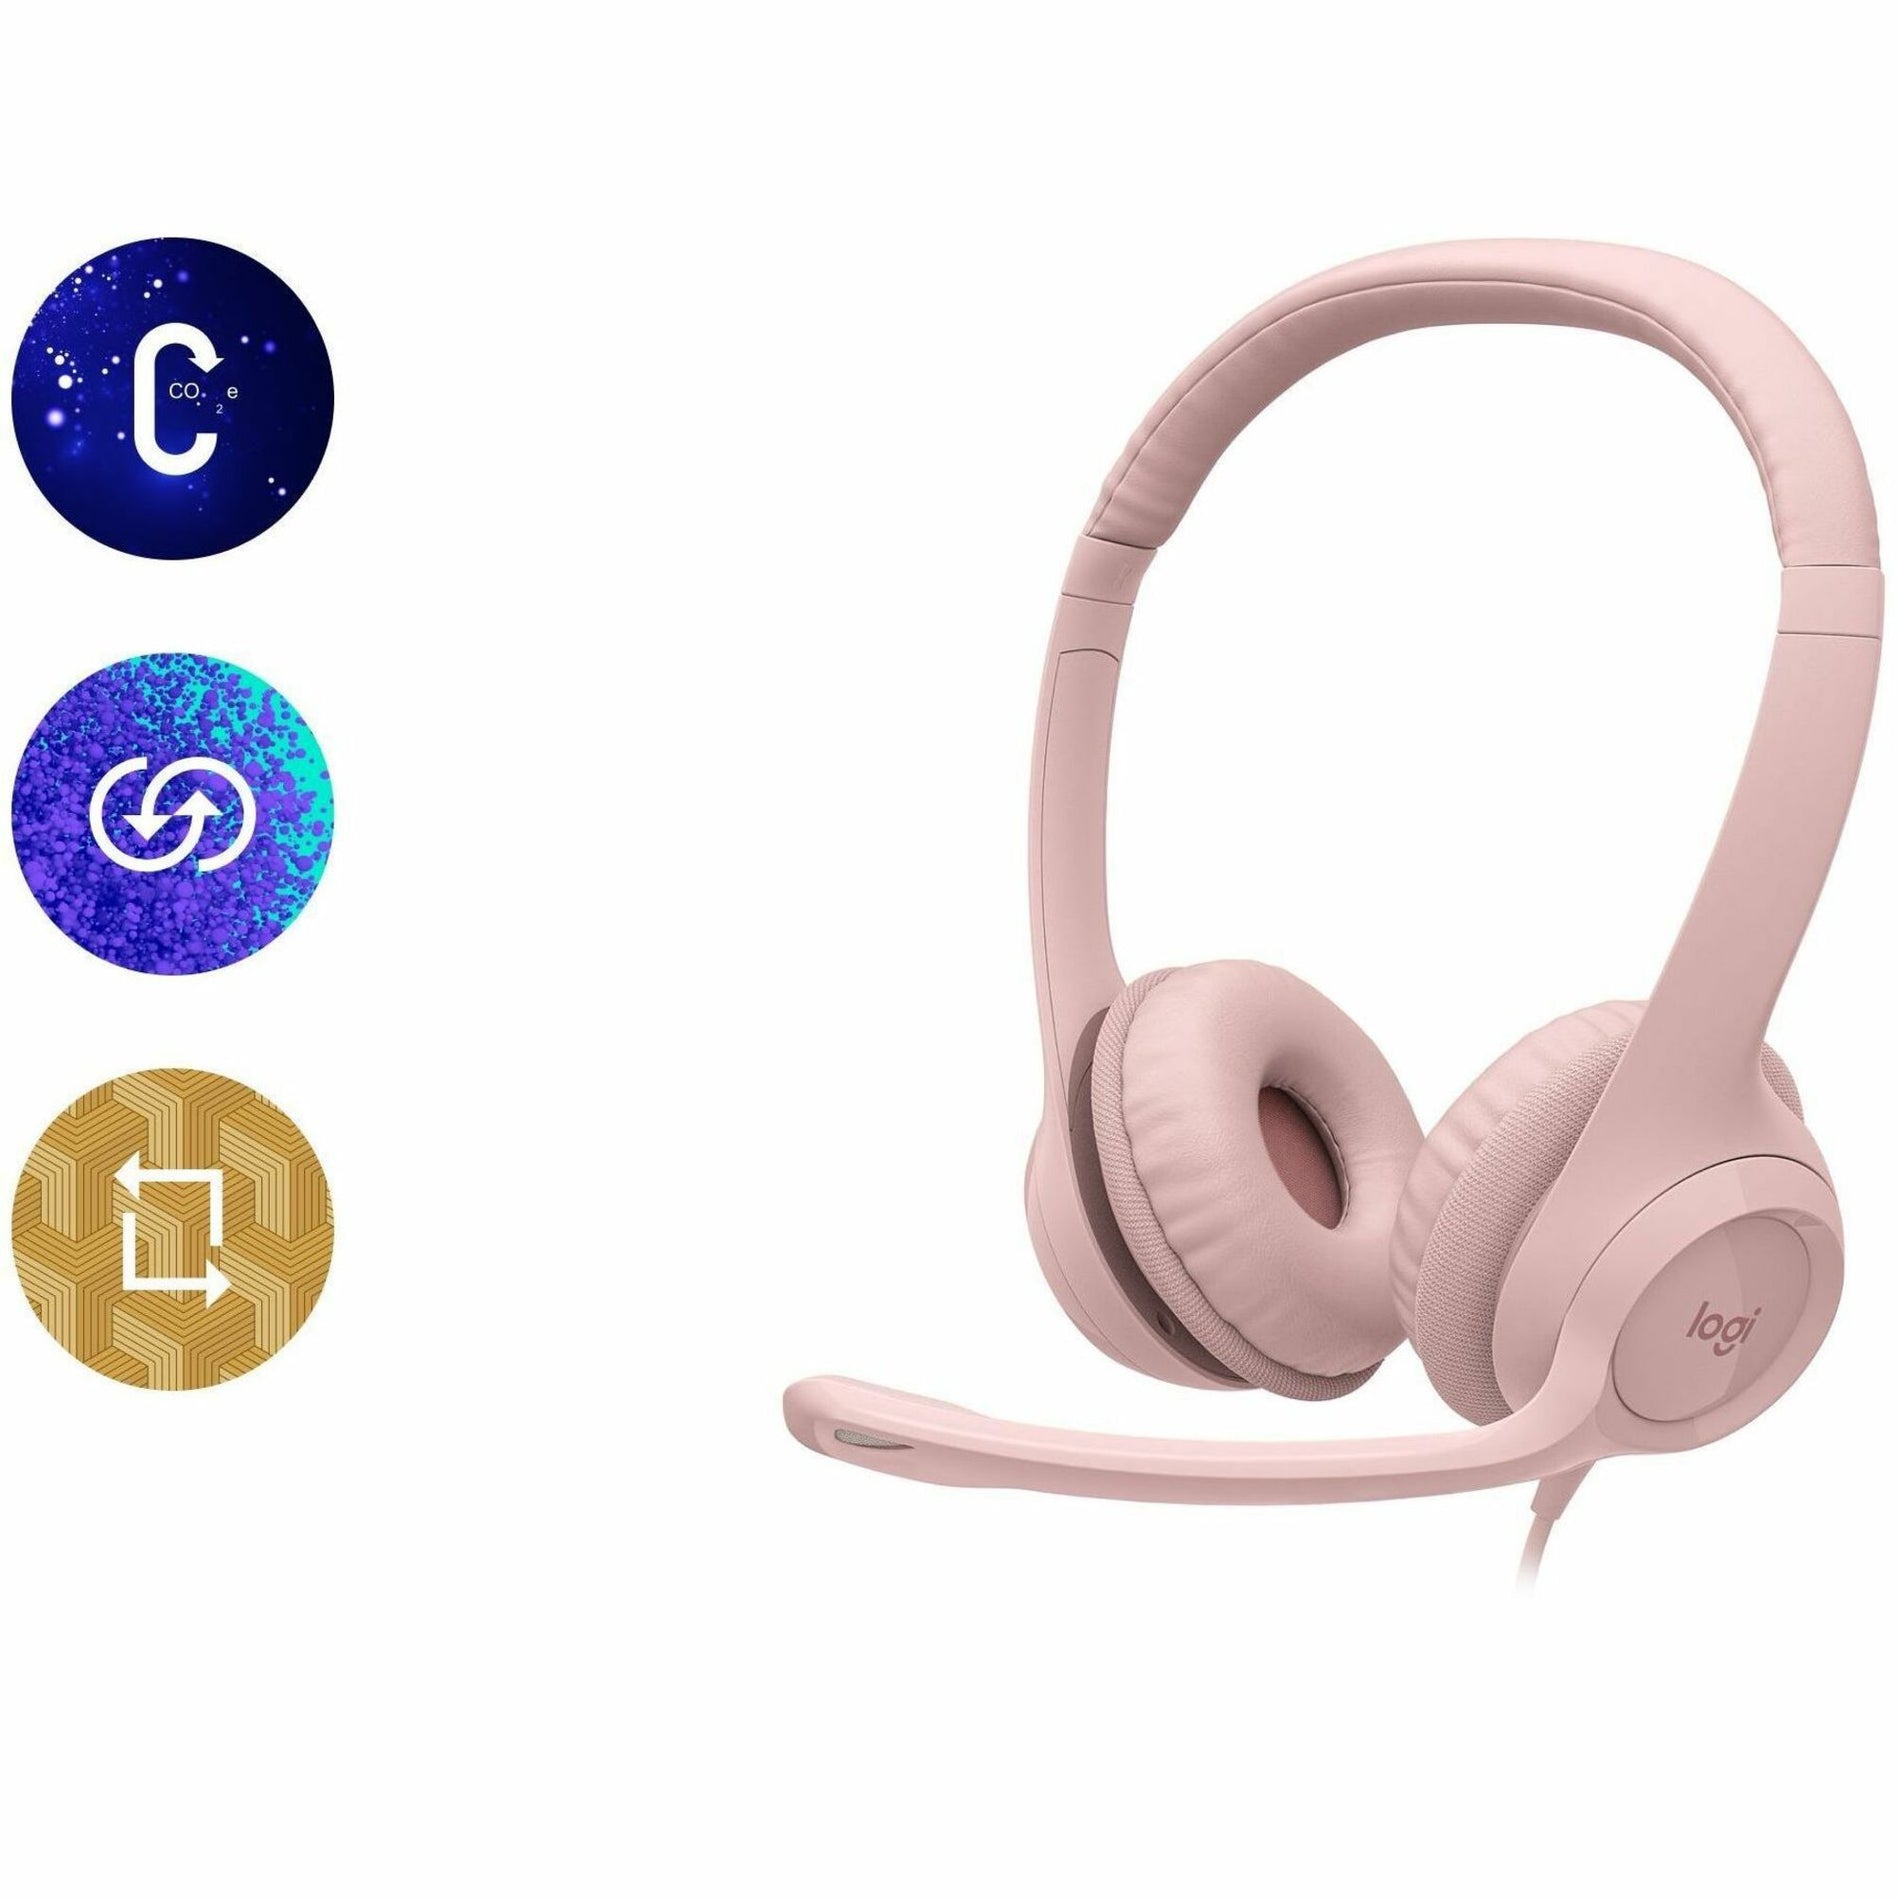 Logitech 981-001280 H390 USB-A Computer Headset, Rose - Adjustable Headband, Comfortable, Noise Cancelling, Plug and Play